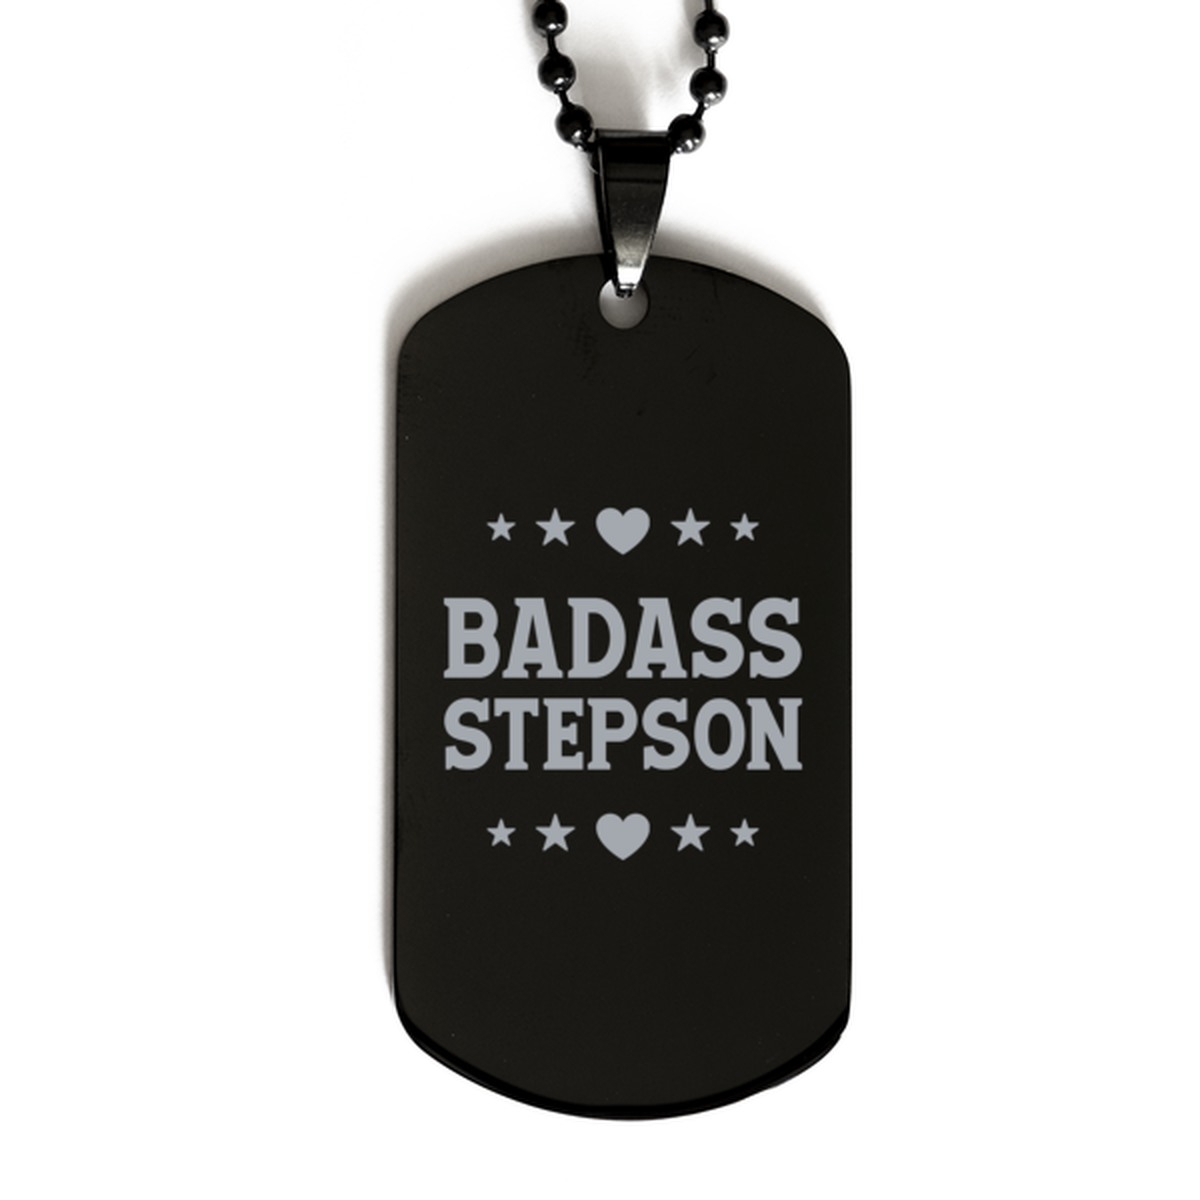 Stepson Black Dog Tag, Badass Stepson, Funny Family Gifts  Necklace For Stepson From Dad Mom